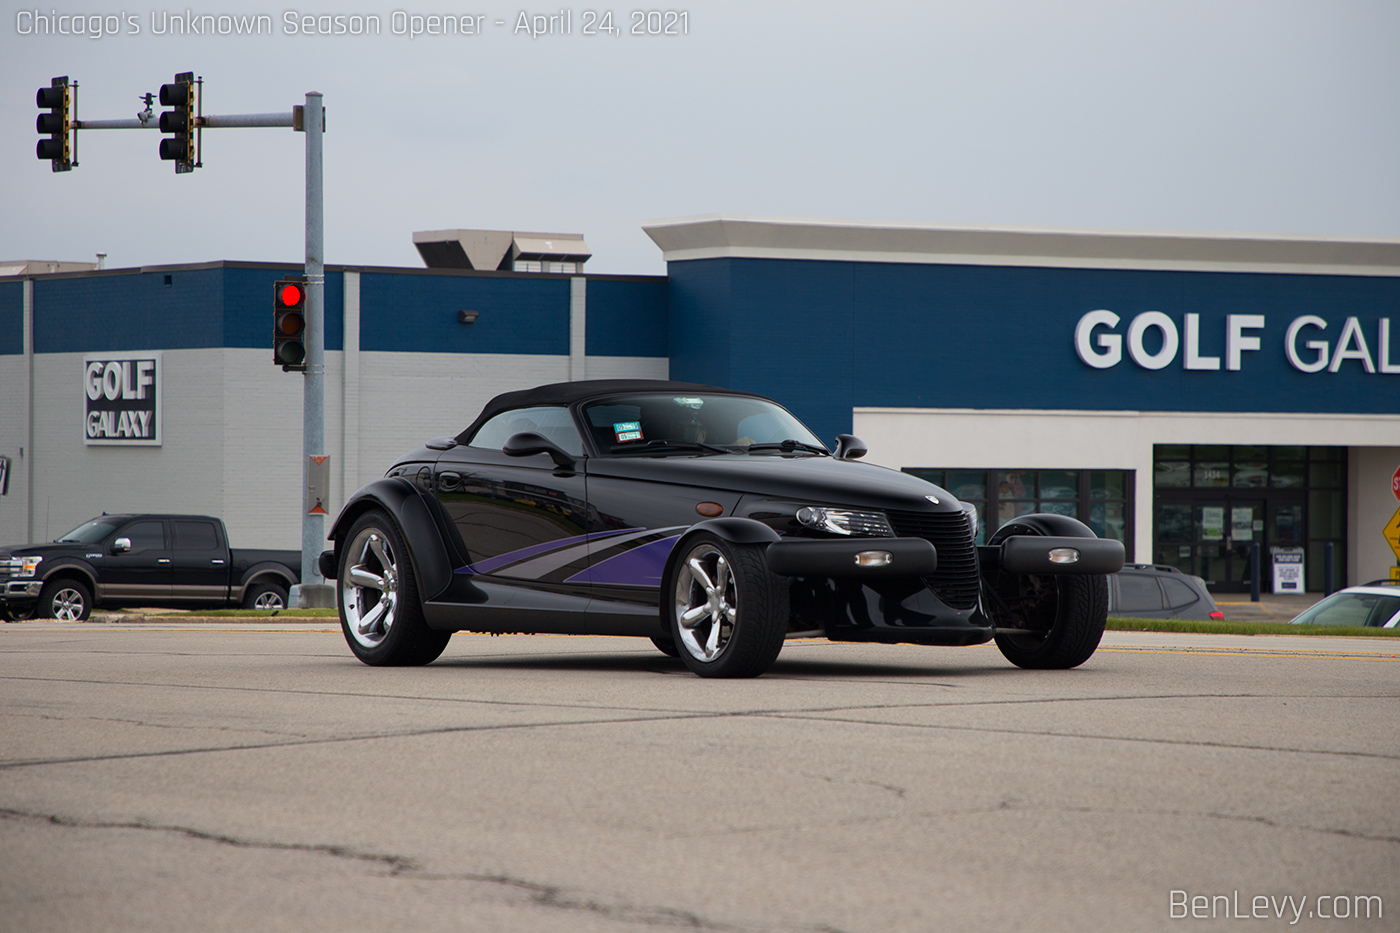 Black Plymouth Prowler